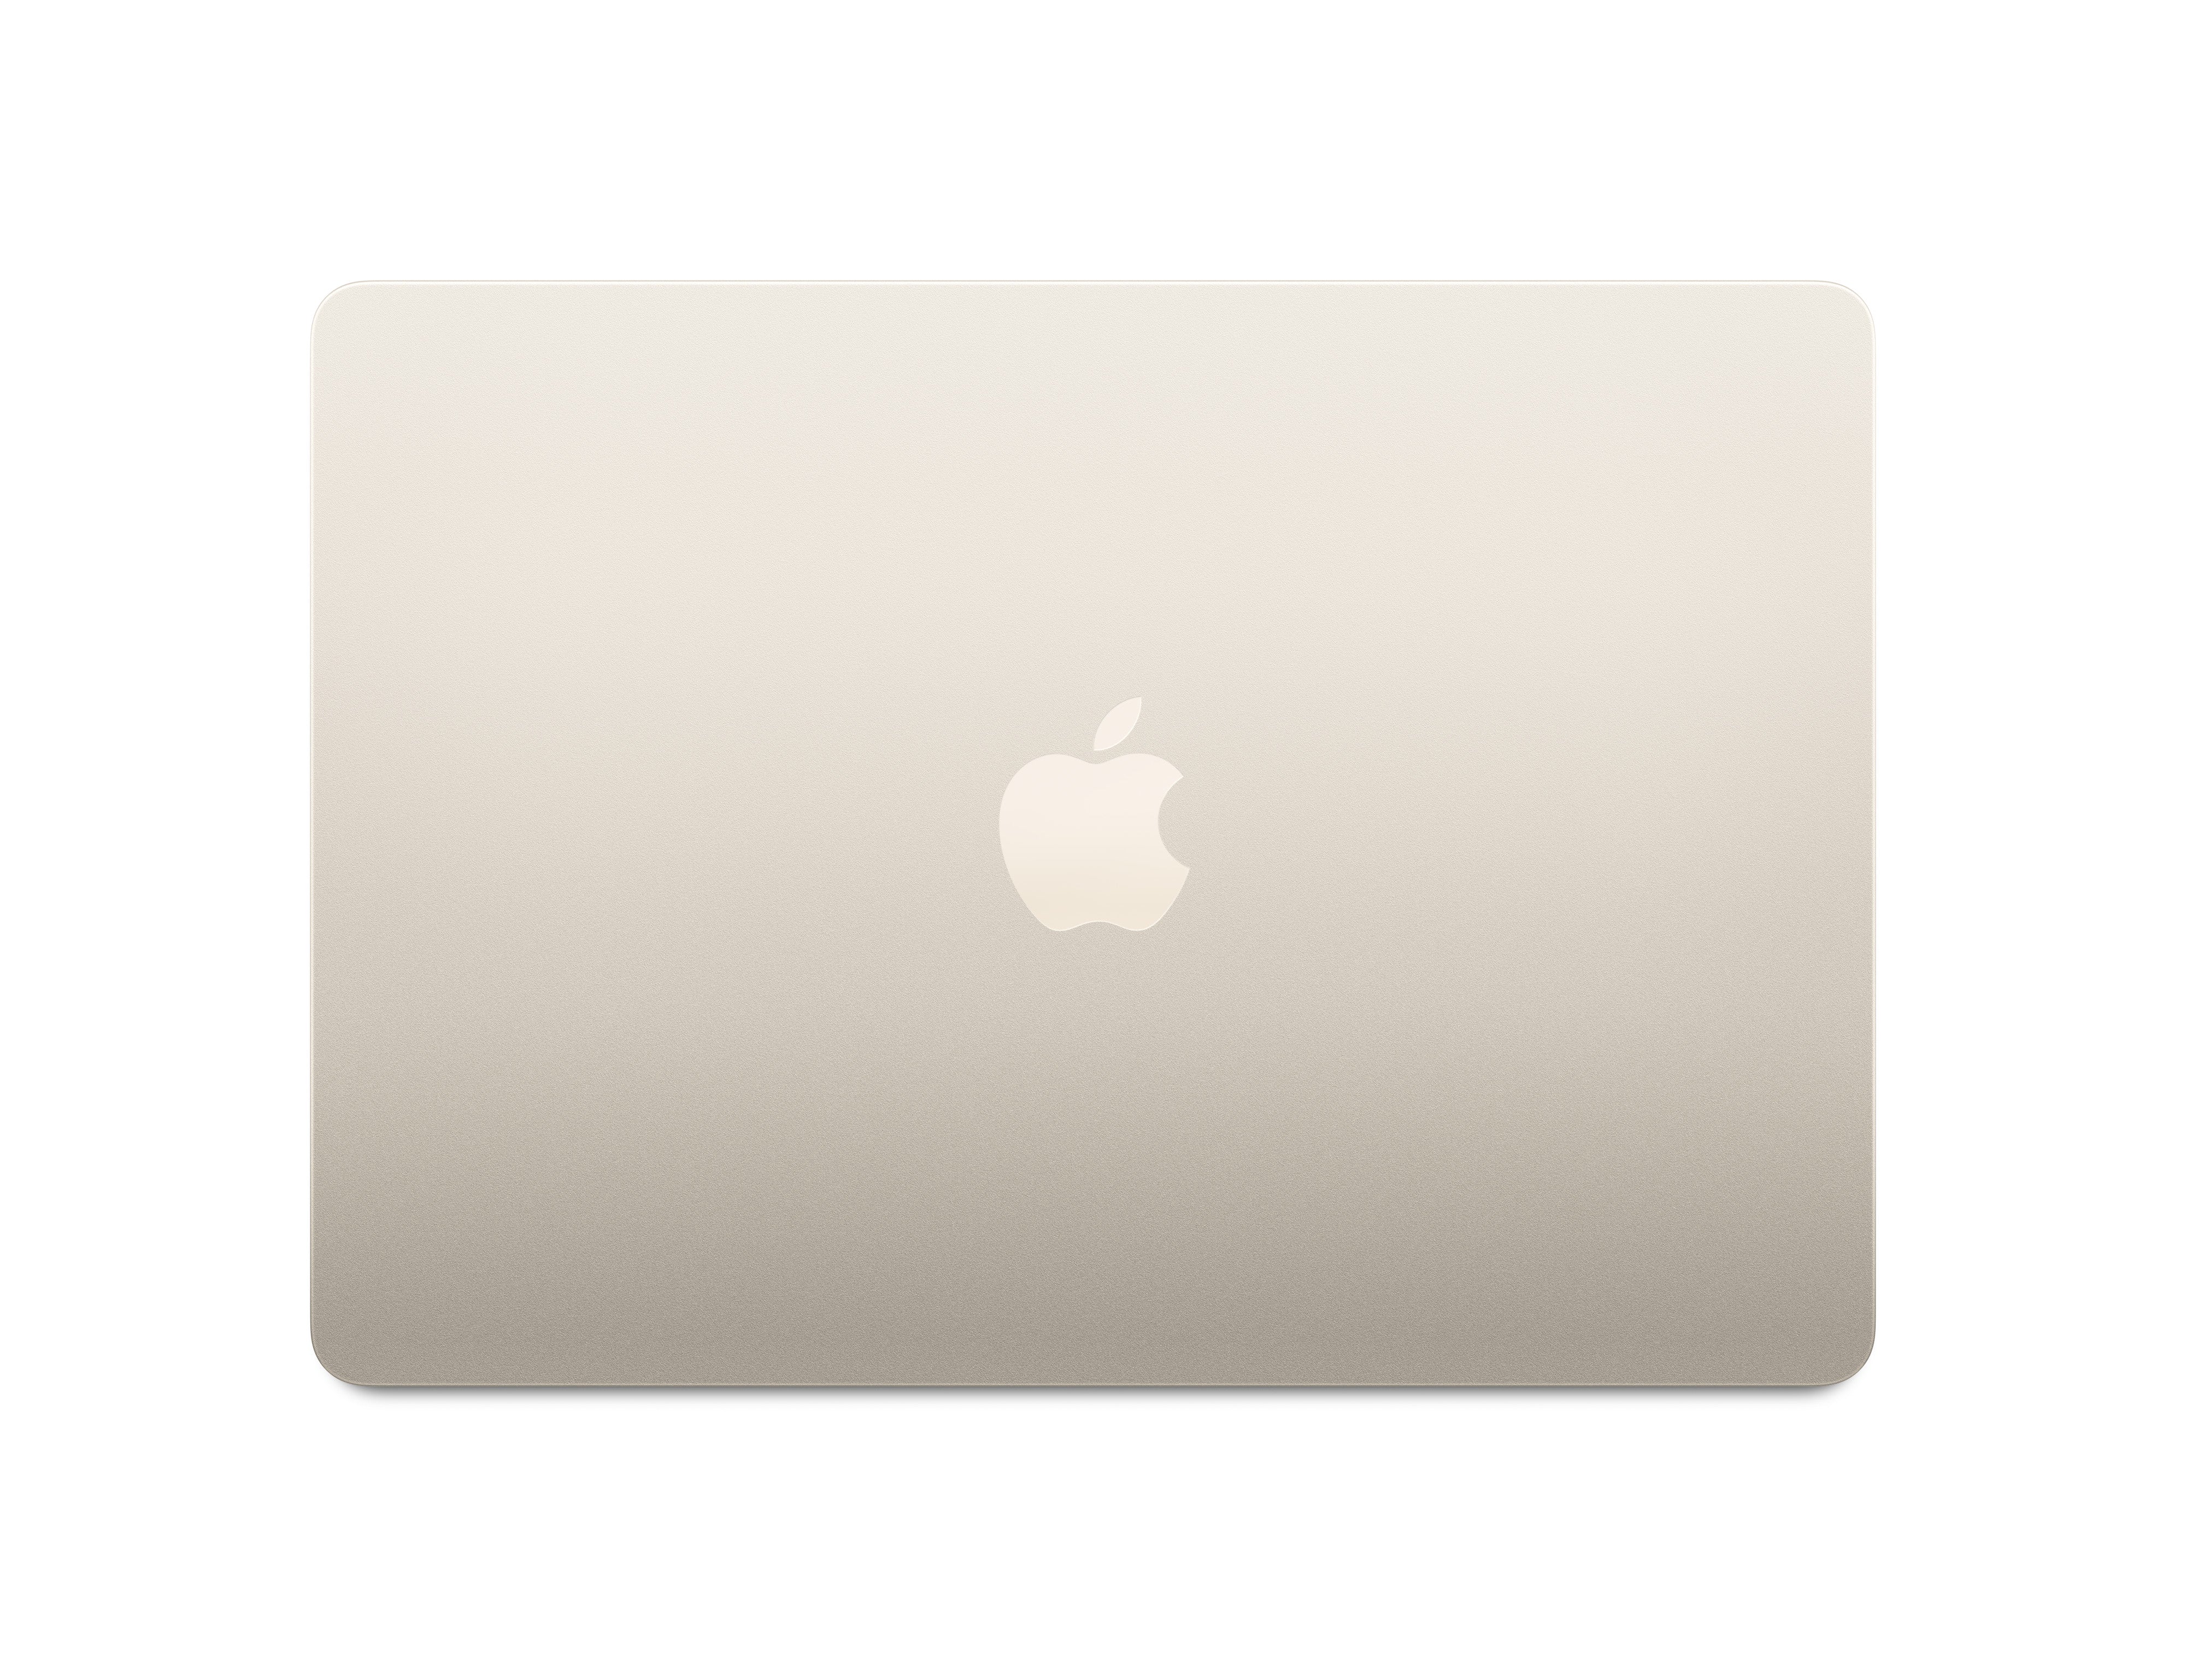 Efficiency Meets Style: Discover the 13-inch MacBook Air - iStore Mauritius